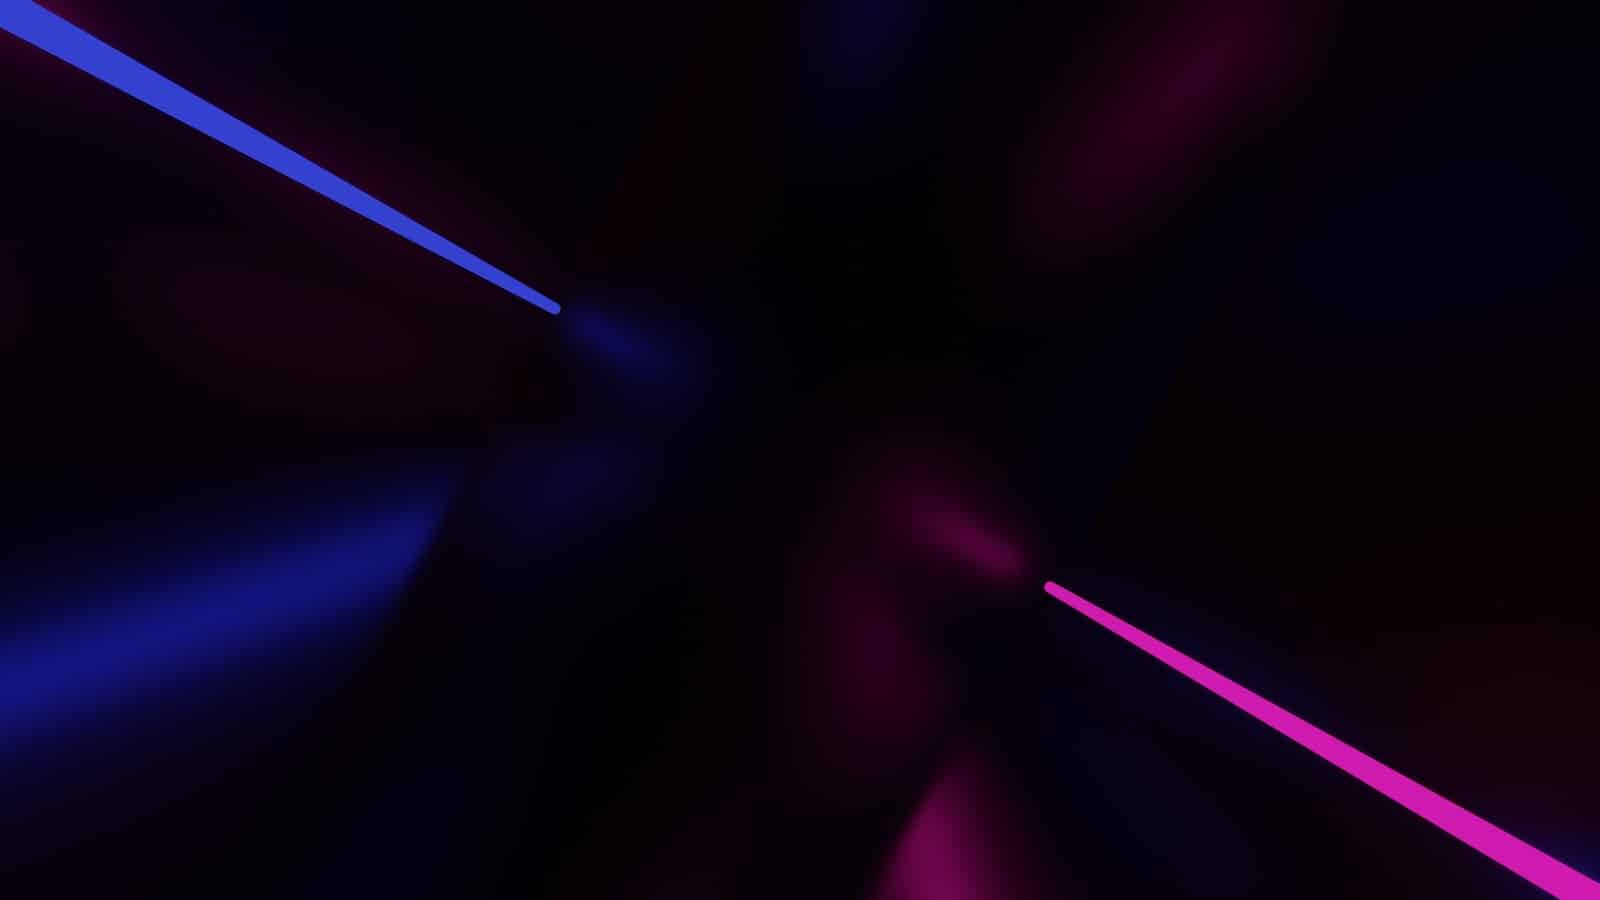 a purple and blue abstract background with lines